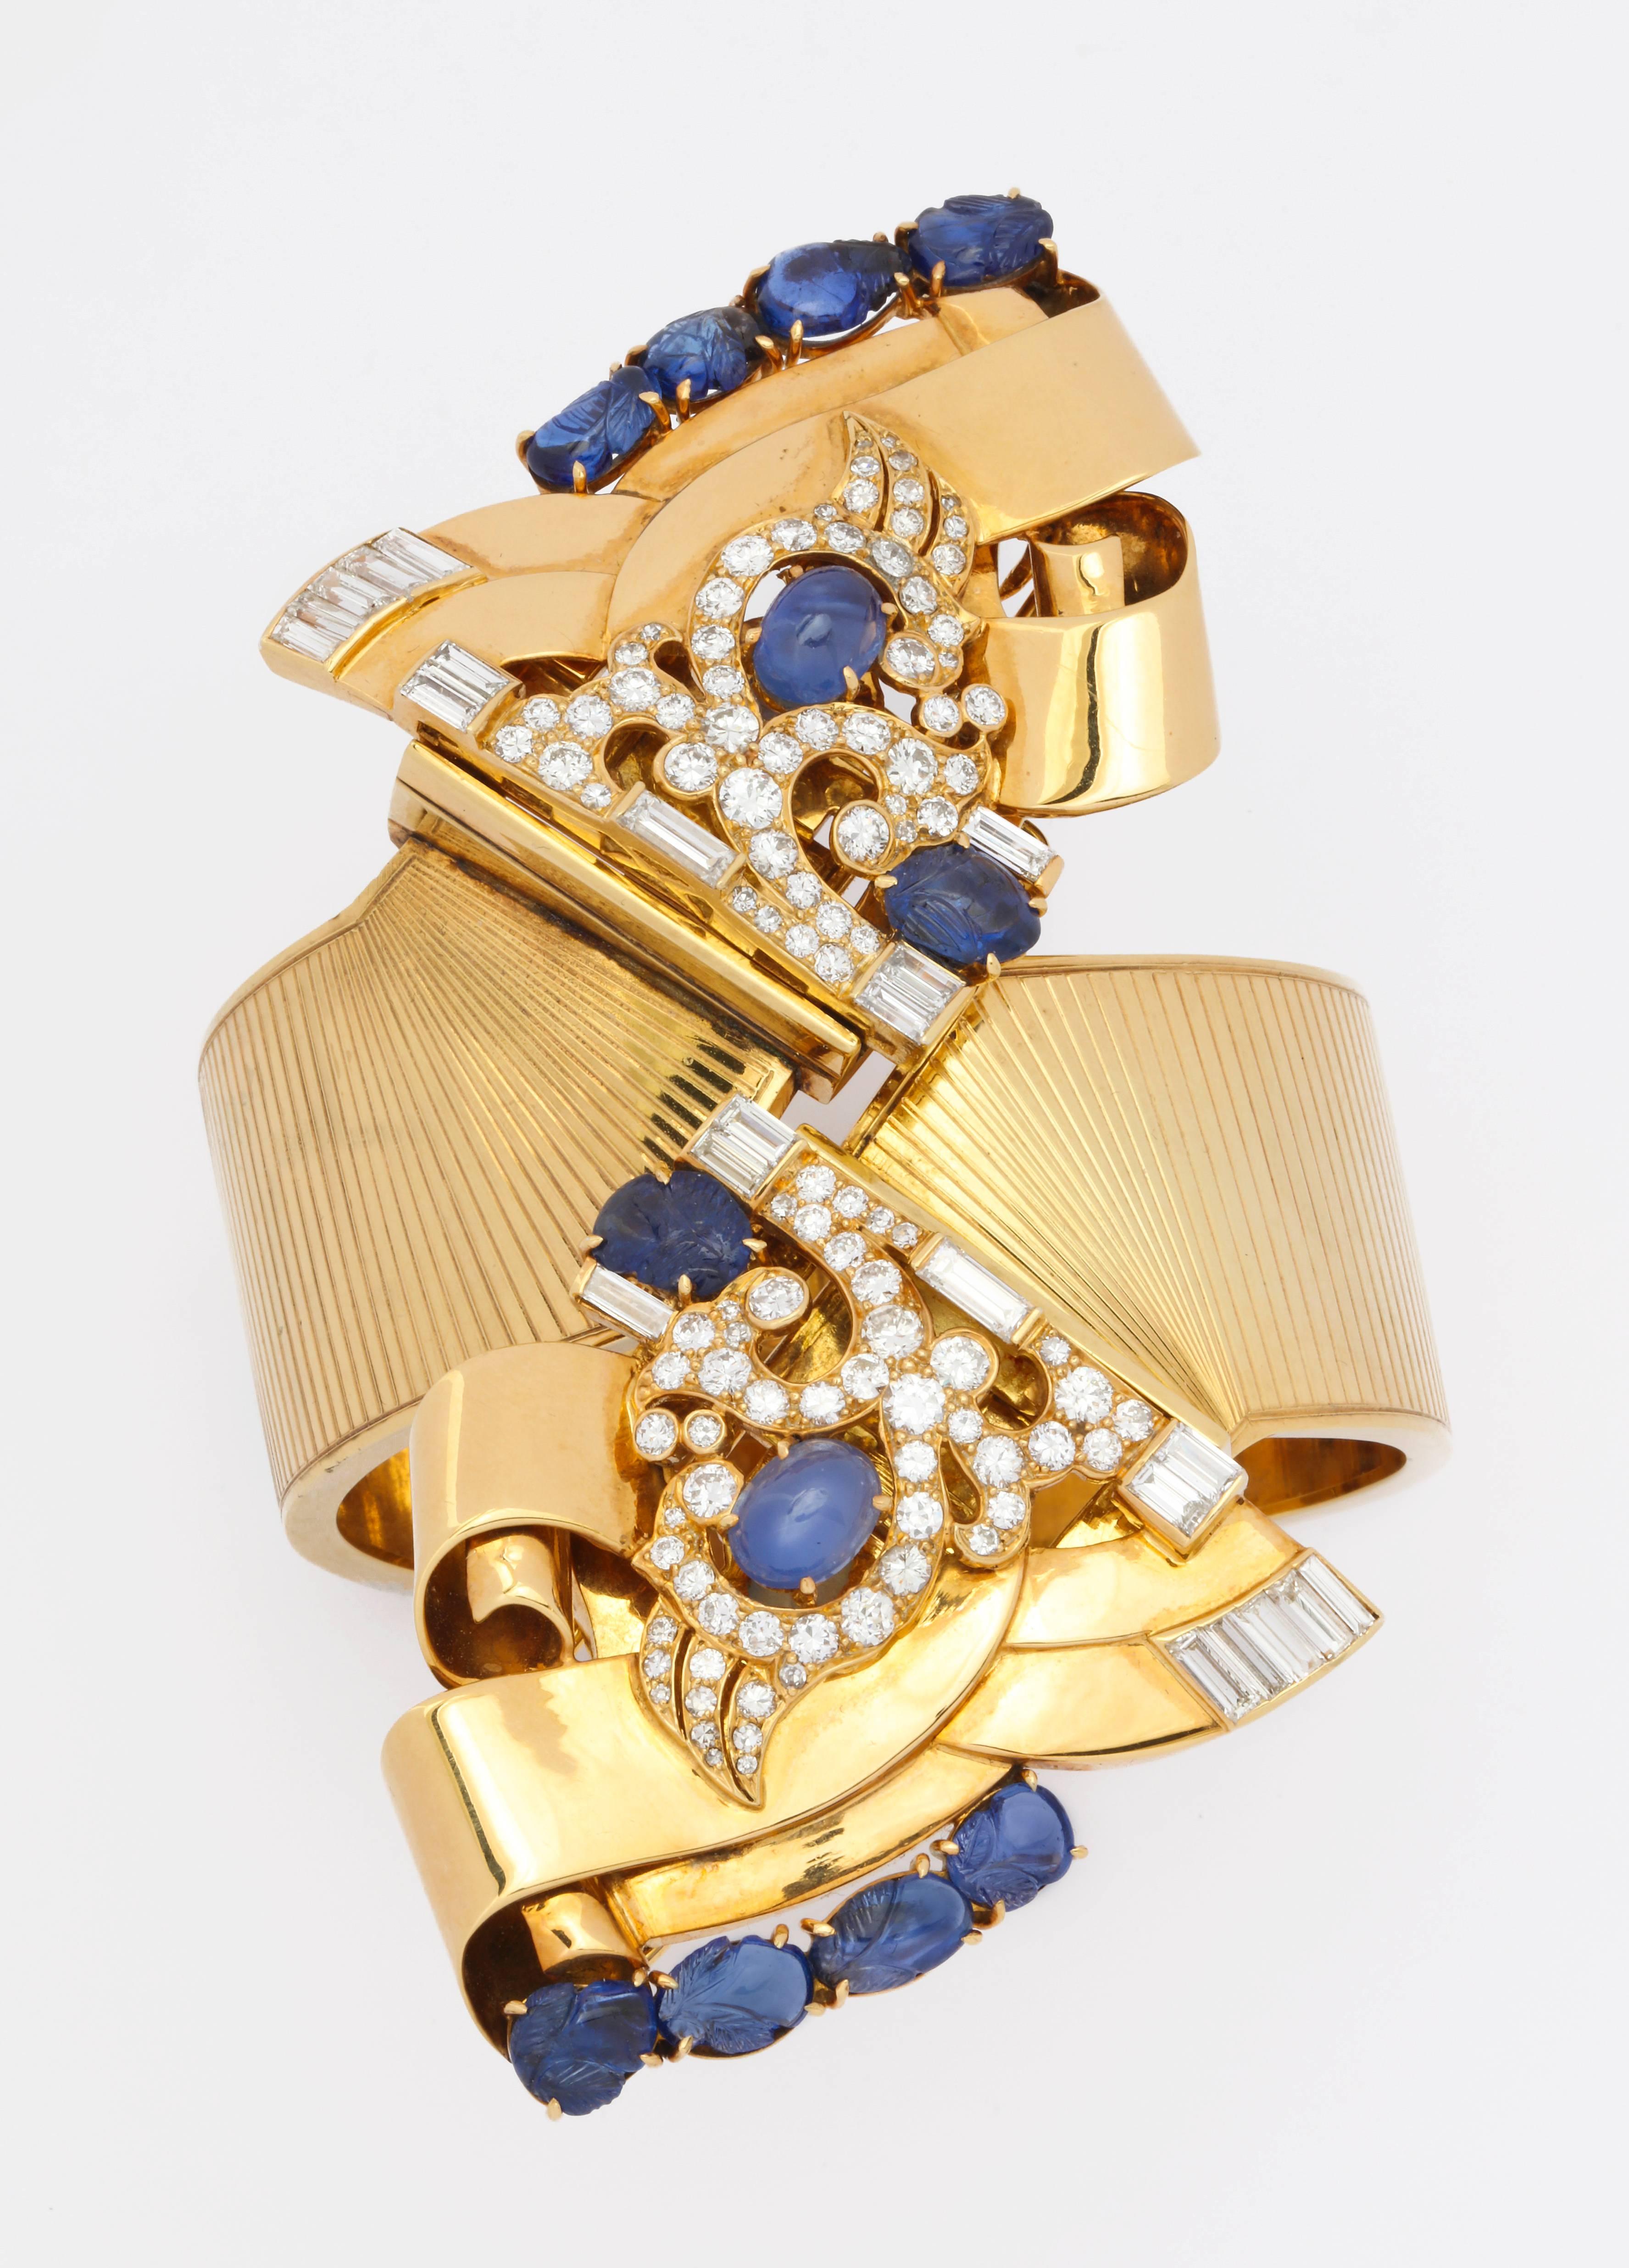 We offer a stunning custom made 1930s Hollywood style society bracelet in 14K gold by E.M. Battle featuring removable dress clips set with 52 round diamonds of 1.65 cts and 22 baguette diamonds of 2.20 cts as well as 12 cabochon and carved sapphires